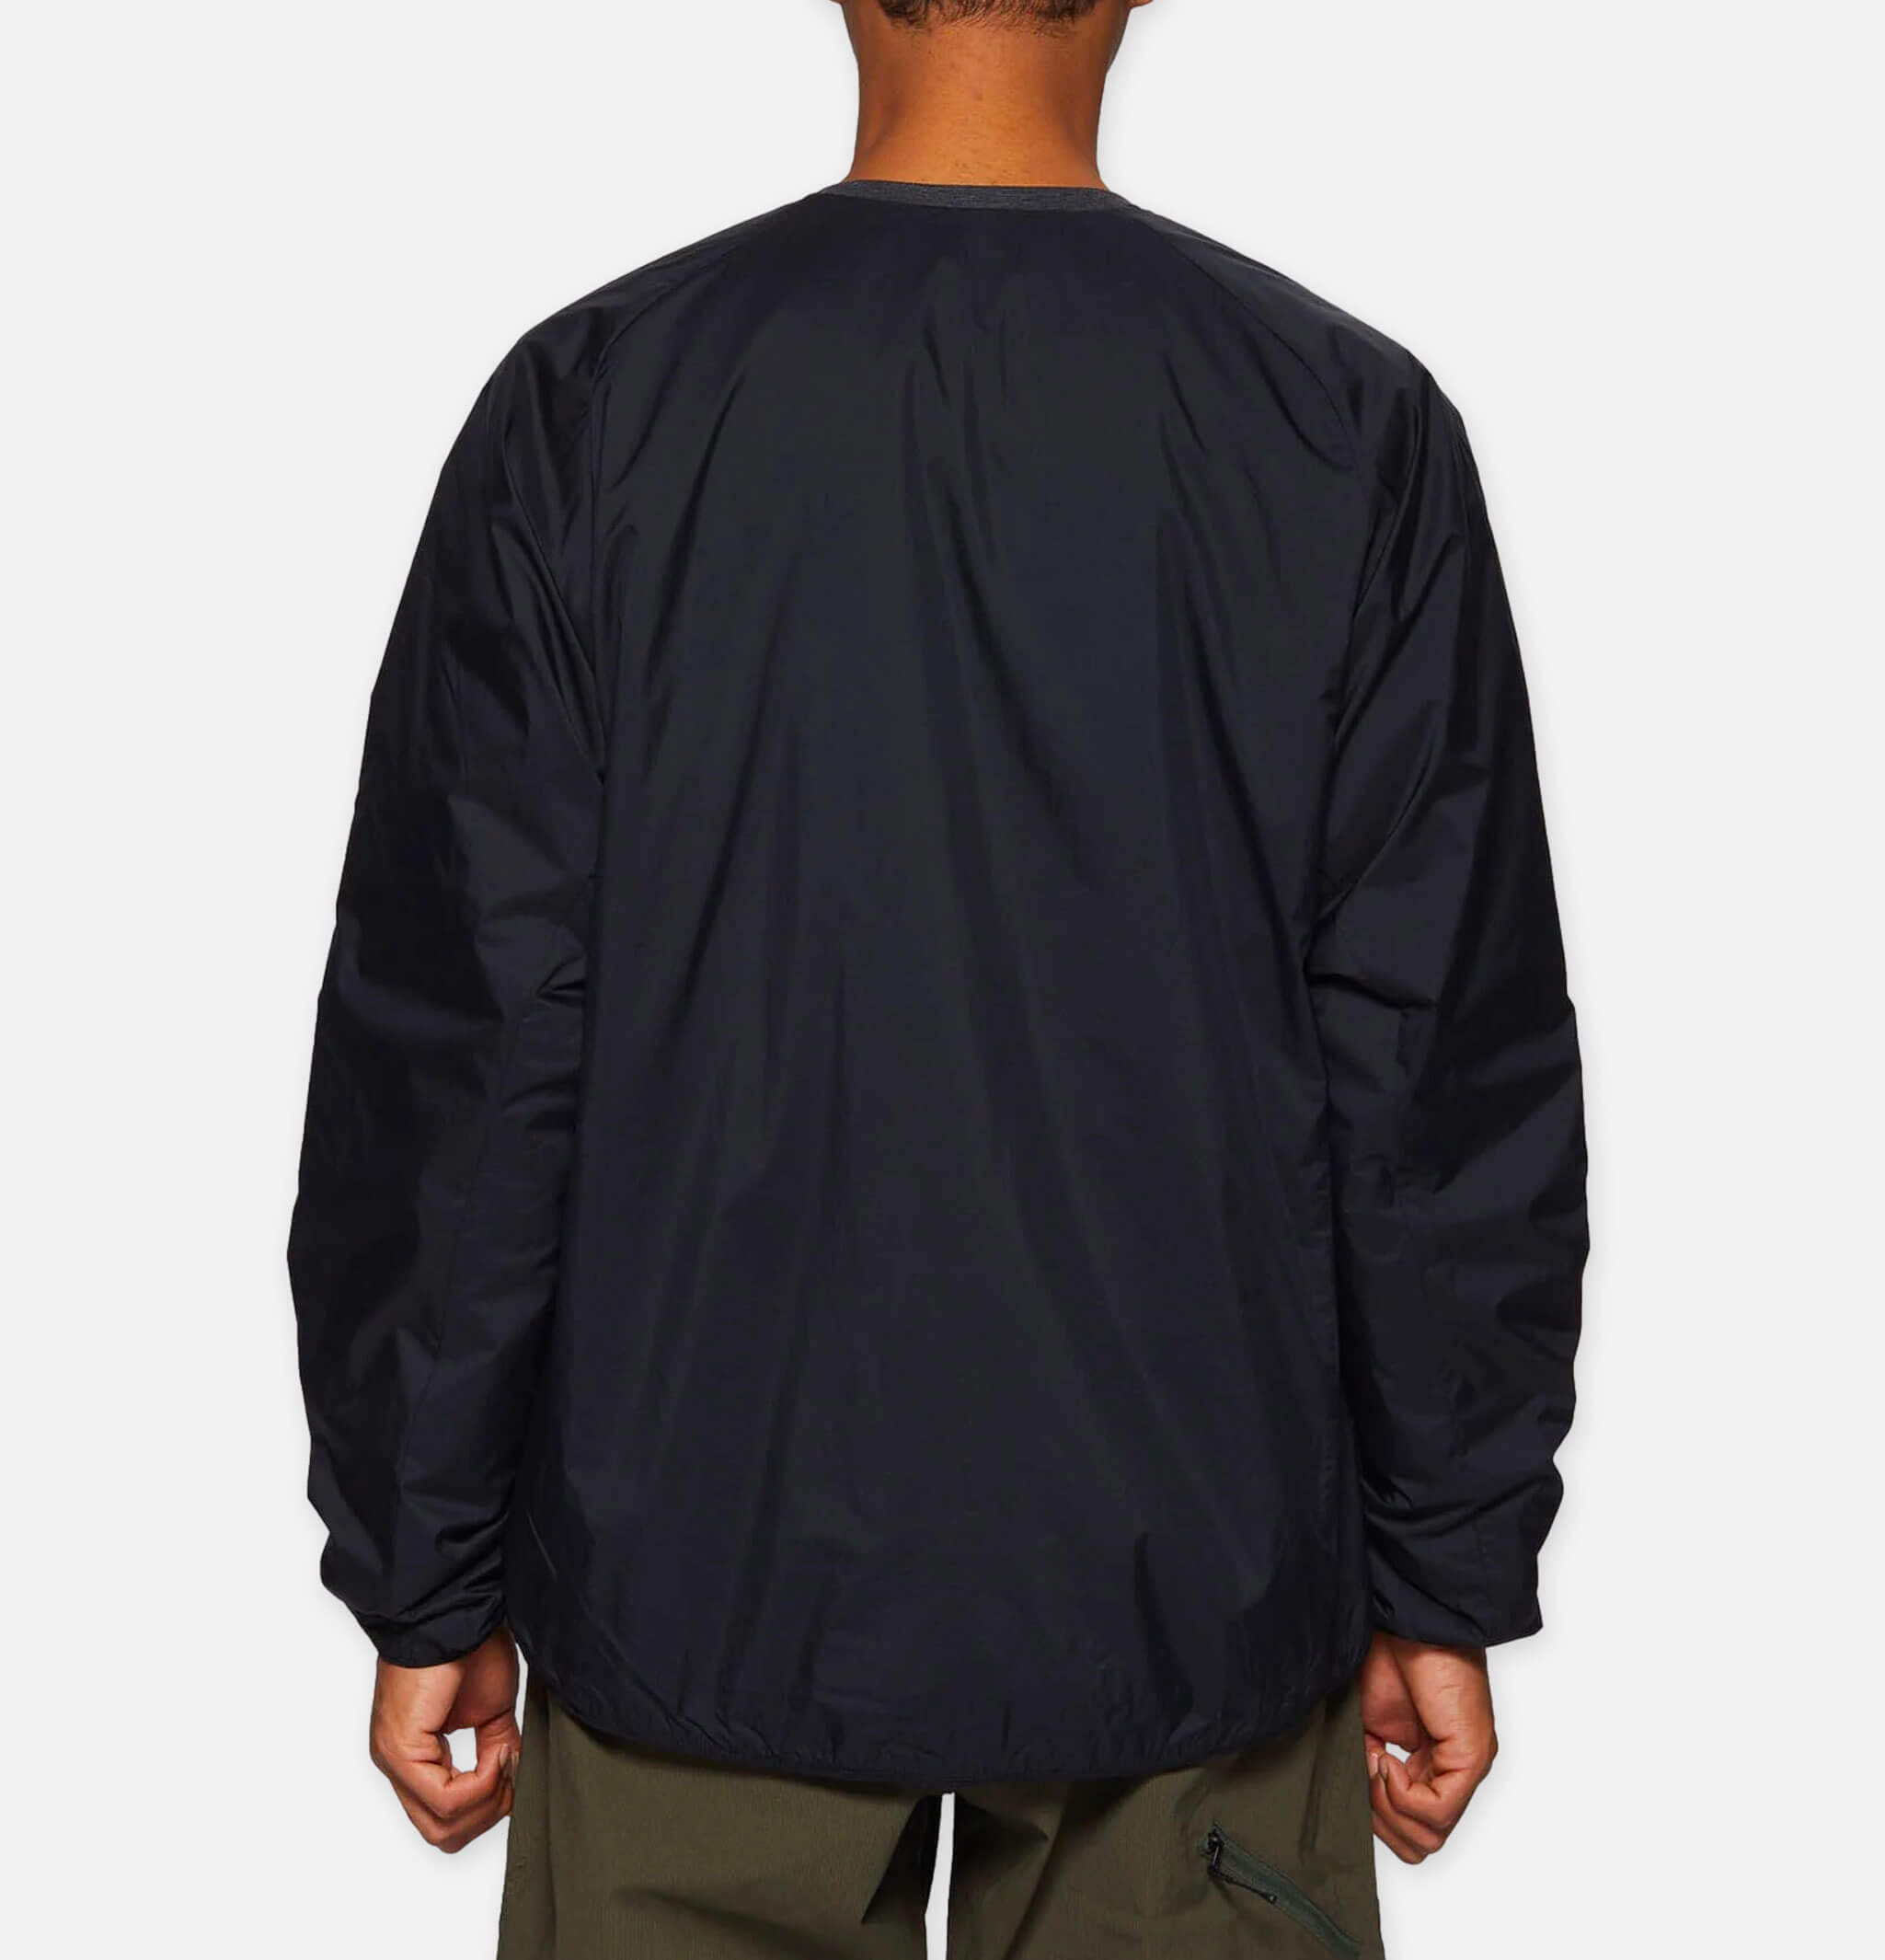 Insulated Long Sleeves Black